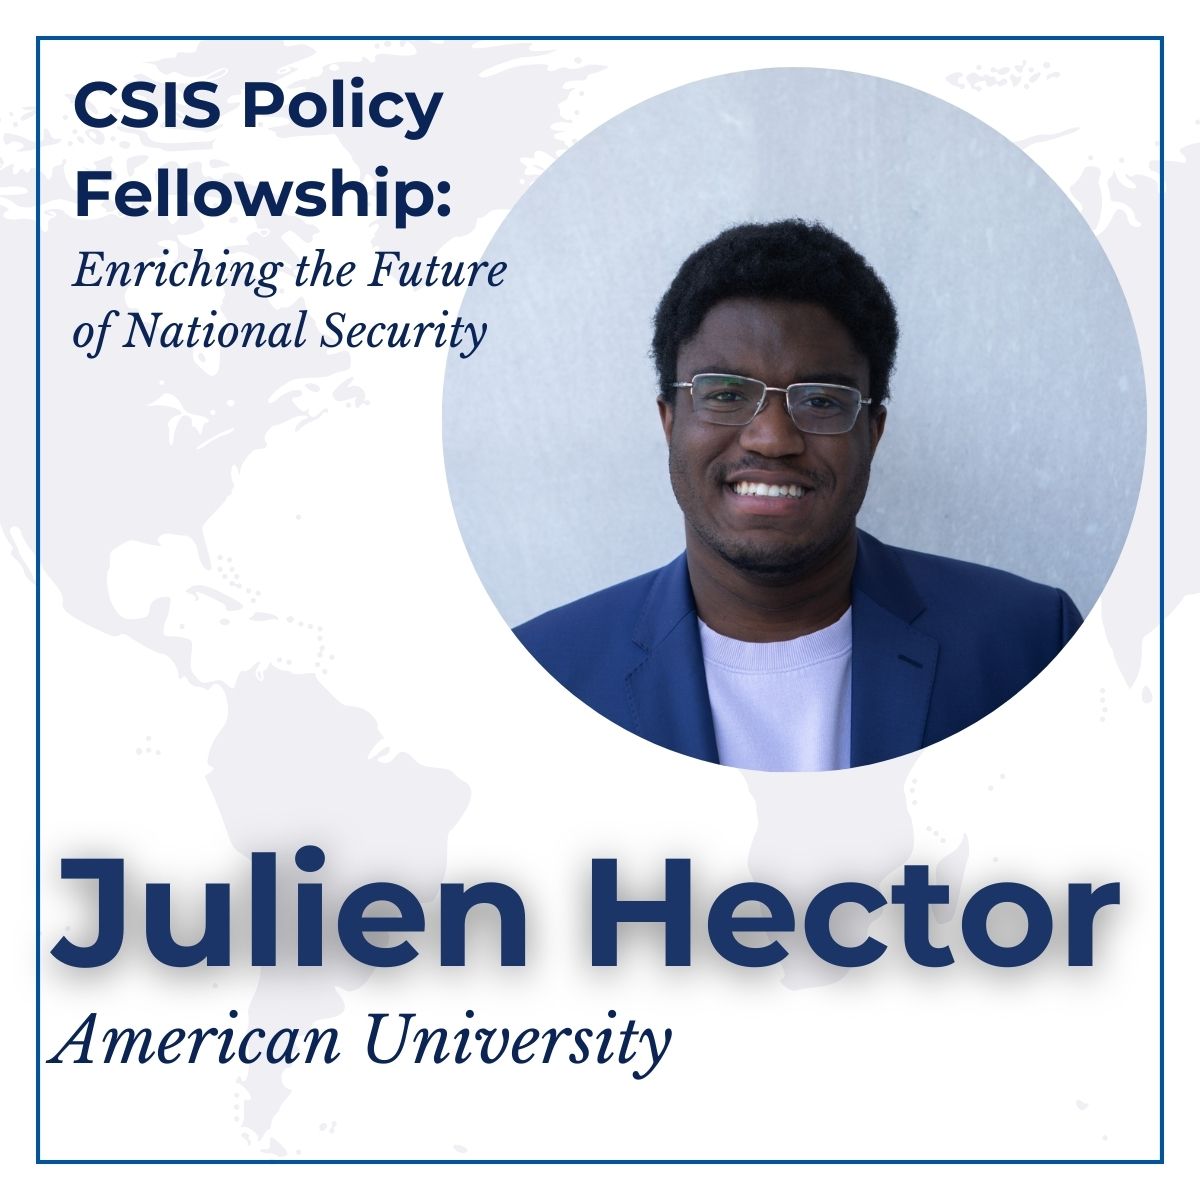 In today’s #PolicyFellowSpotlight, we introduce Julien Hector. Julien is a senior at @AmericanU majoring in intl. studies. He is currently interning at @LAWGaction, researching socioeconomic and environmental justice in Latin America and the Caribbean. Welcome to CSIS, Julien!